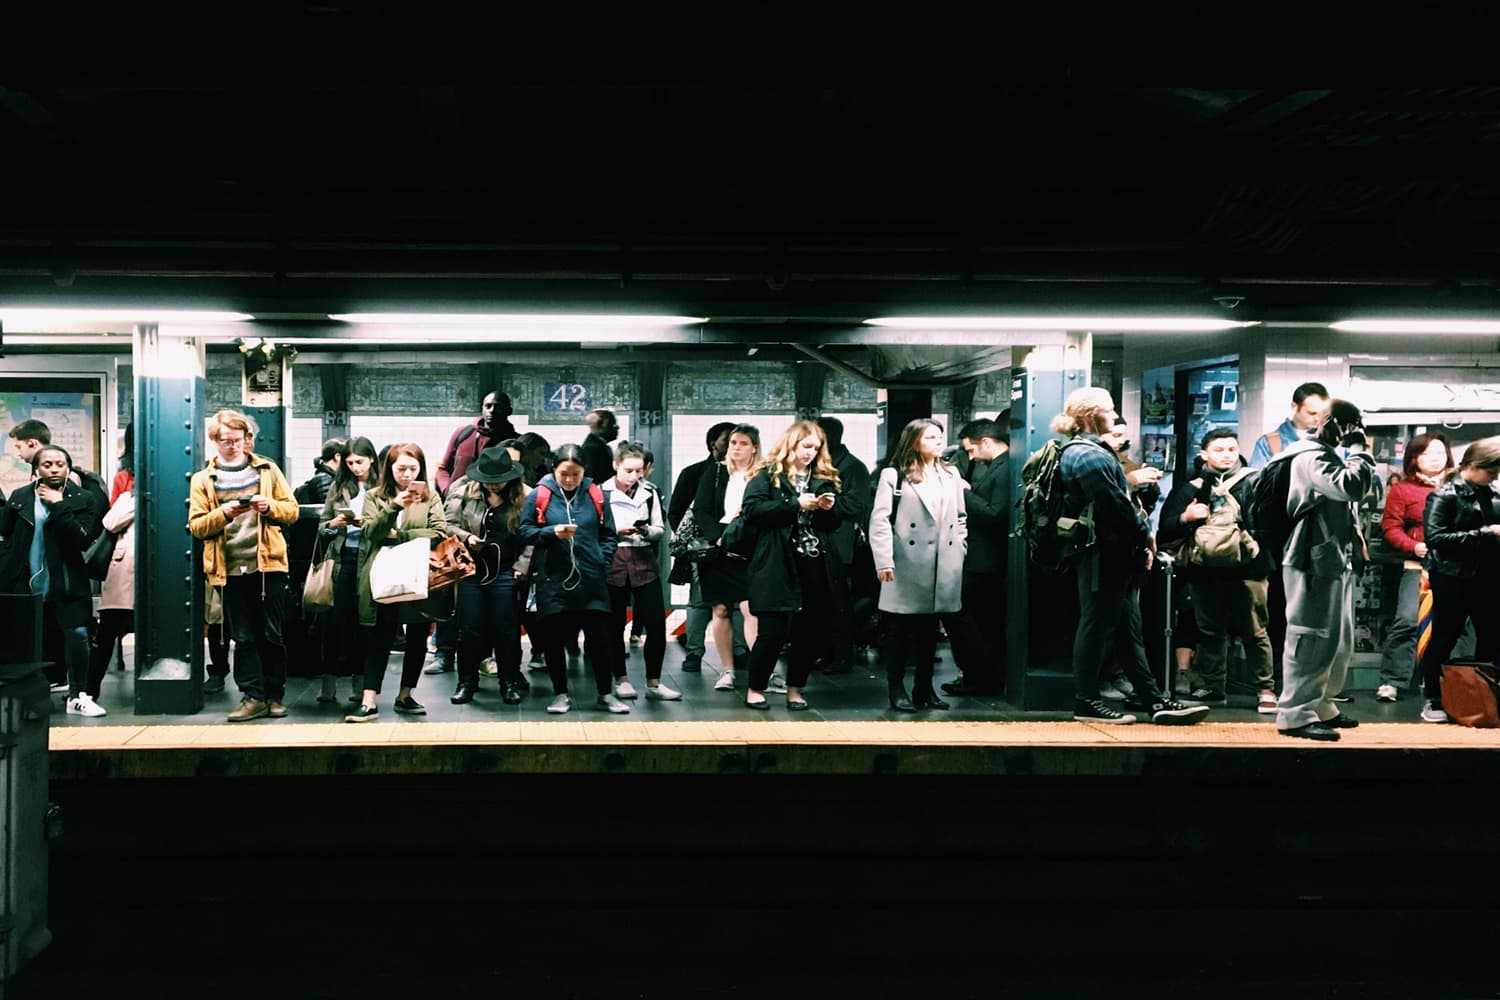 A crowd waiting for the train in the New York City subway. (Eddi Aguirre/Unsplash)